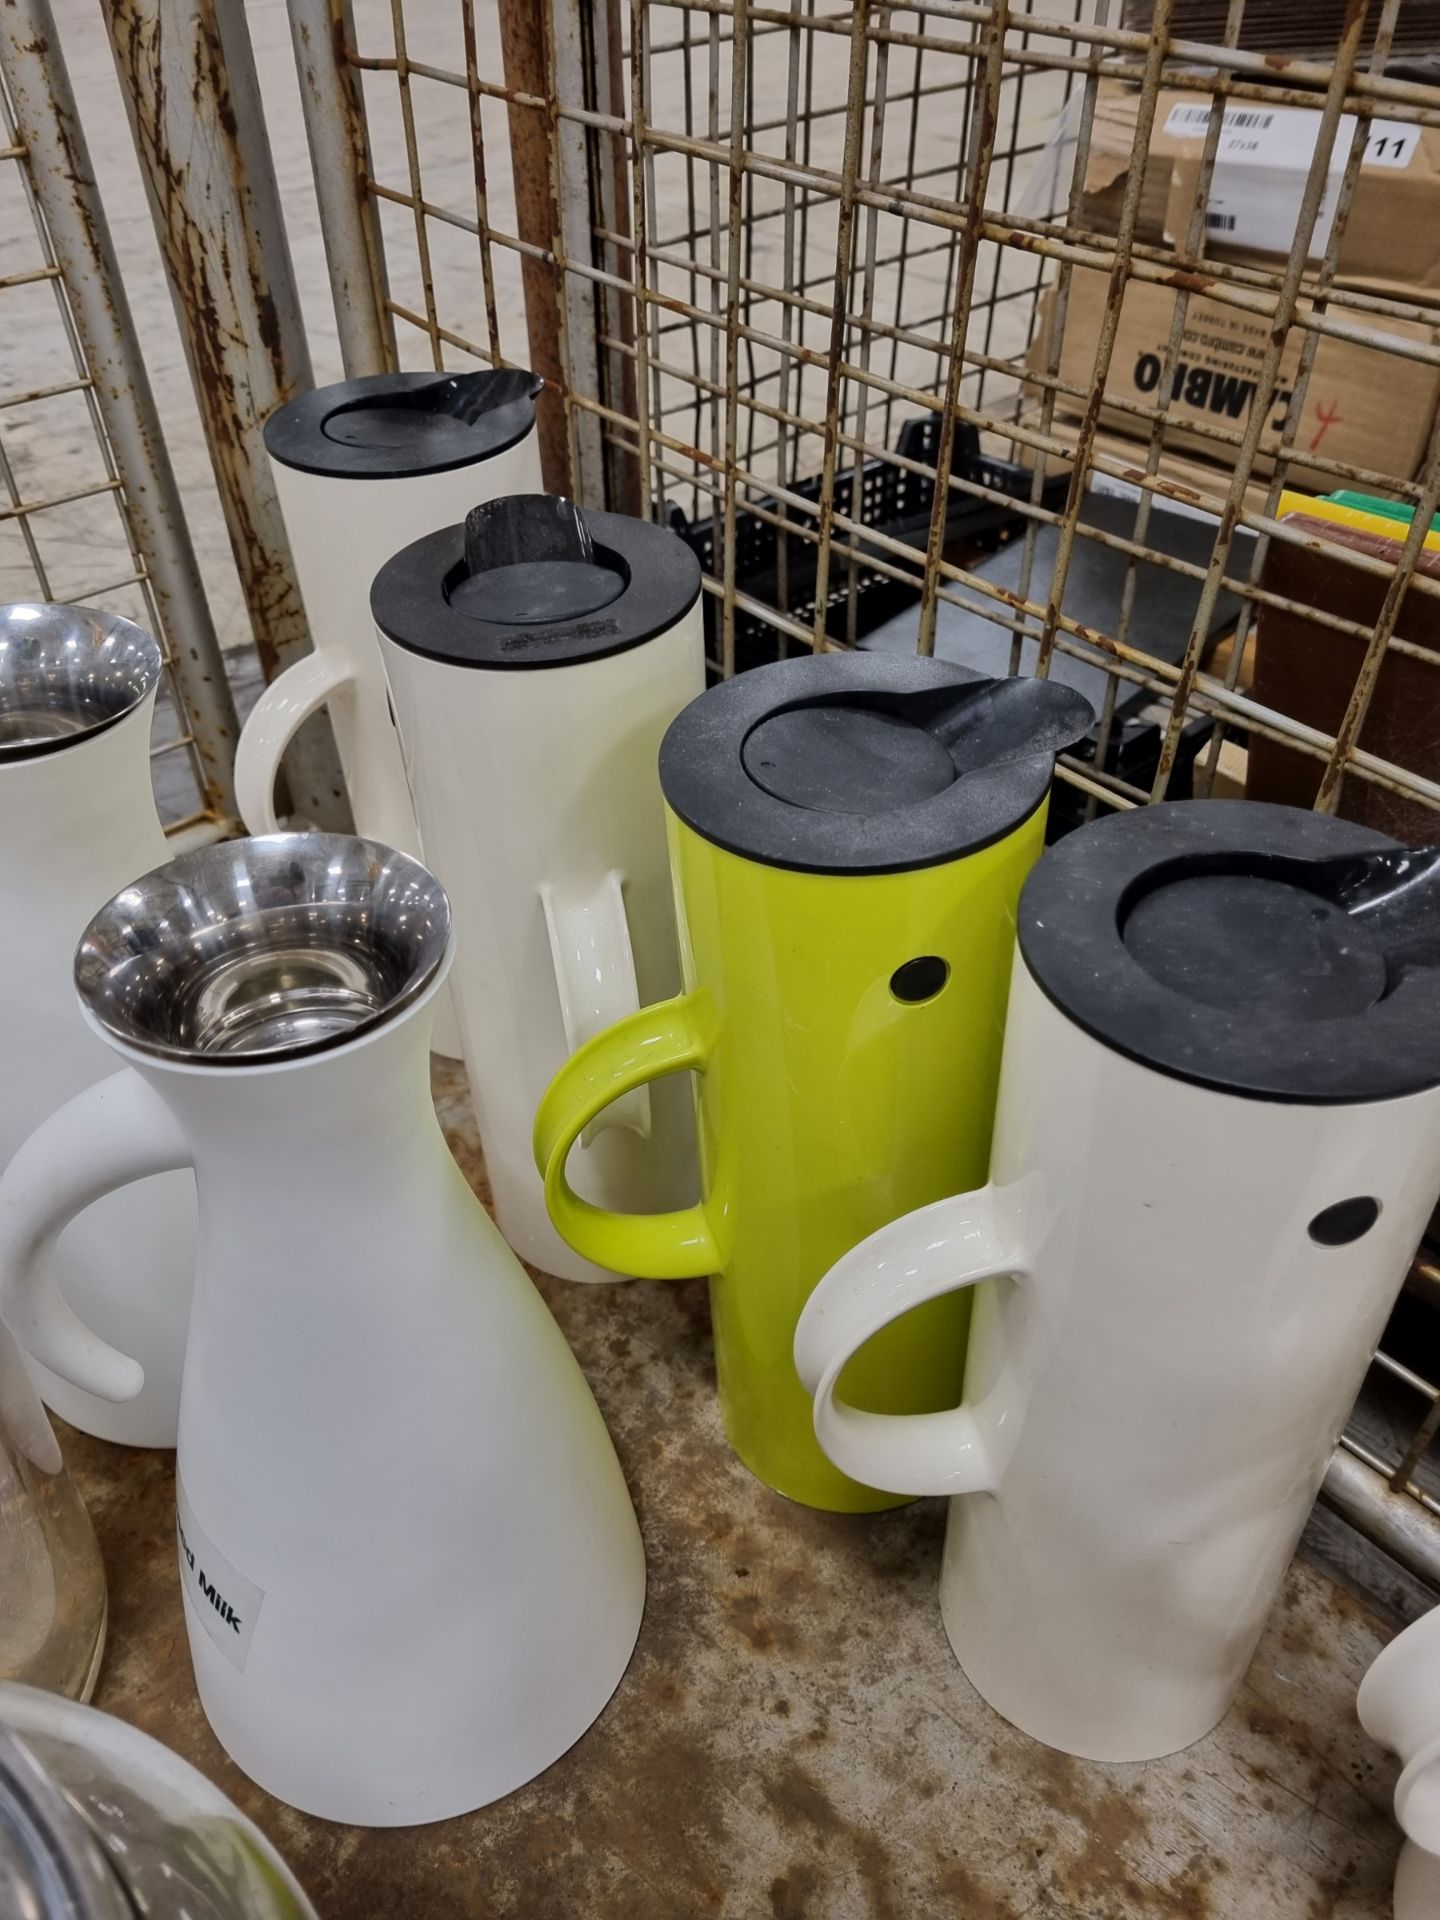 Catering equipment and supplies consisting of thermos type jugs, glassware, storage containers, jugs - Image 9 of 9